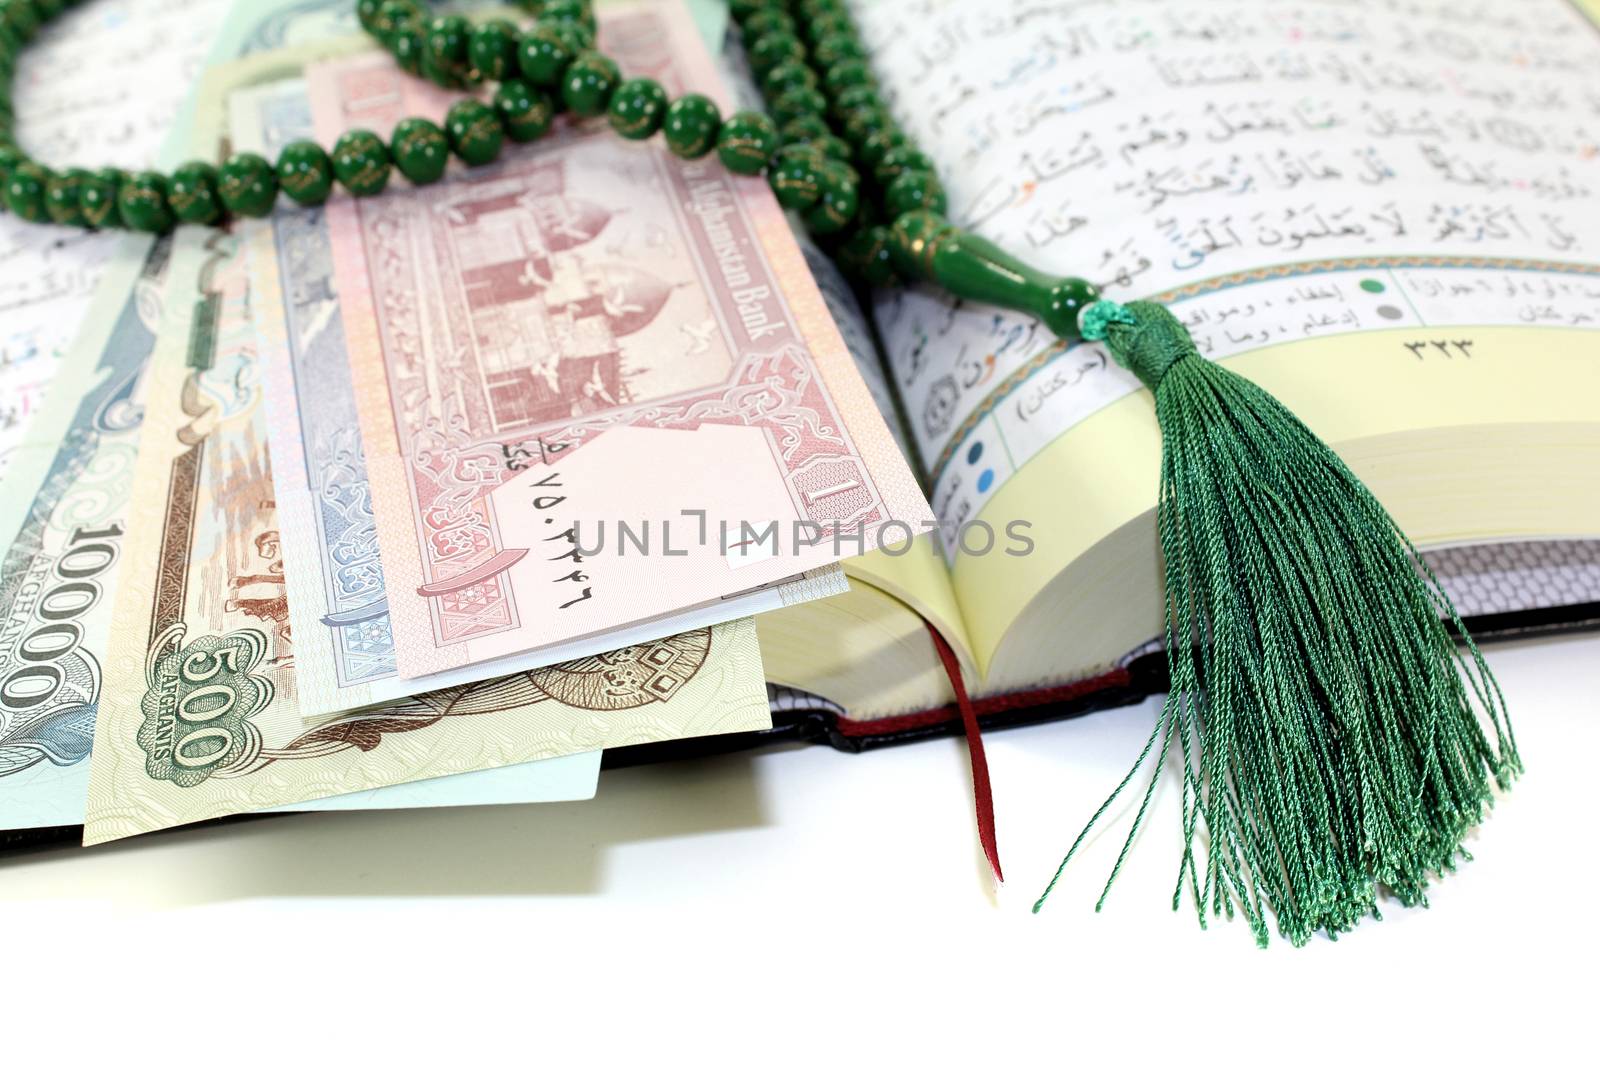 whipped Quran with afghanistanischer currency by discovery